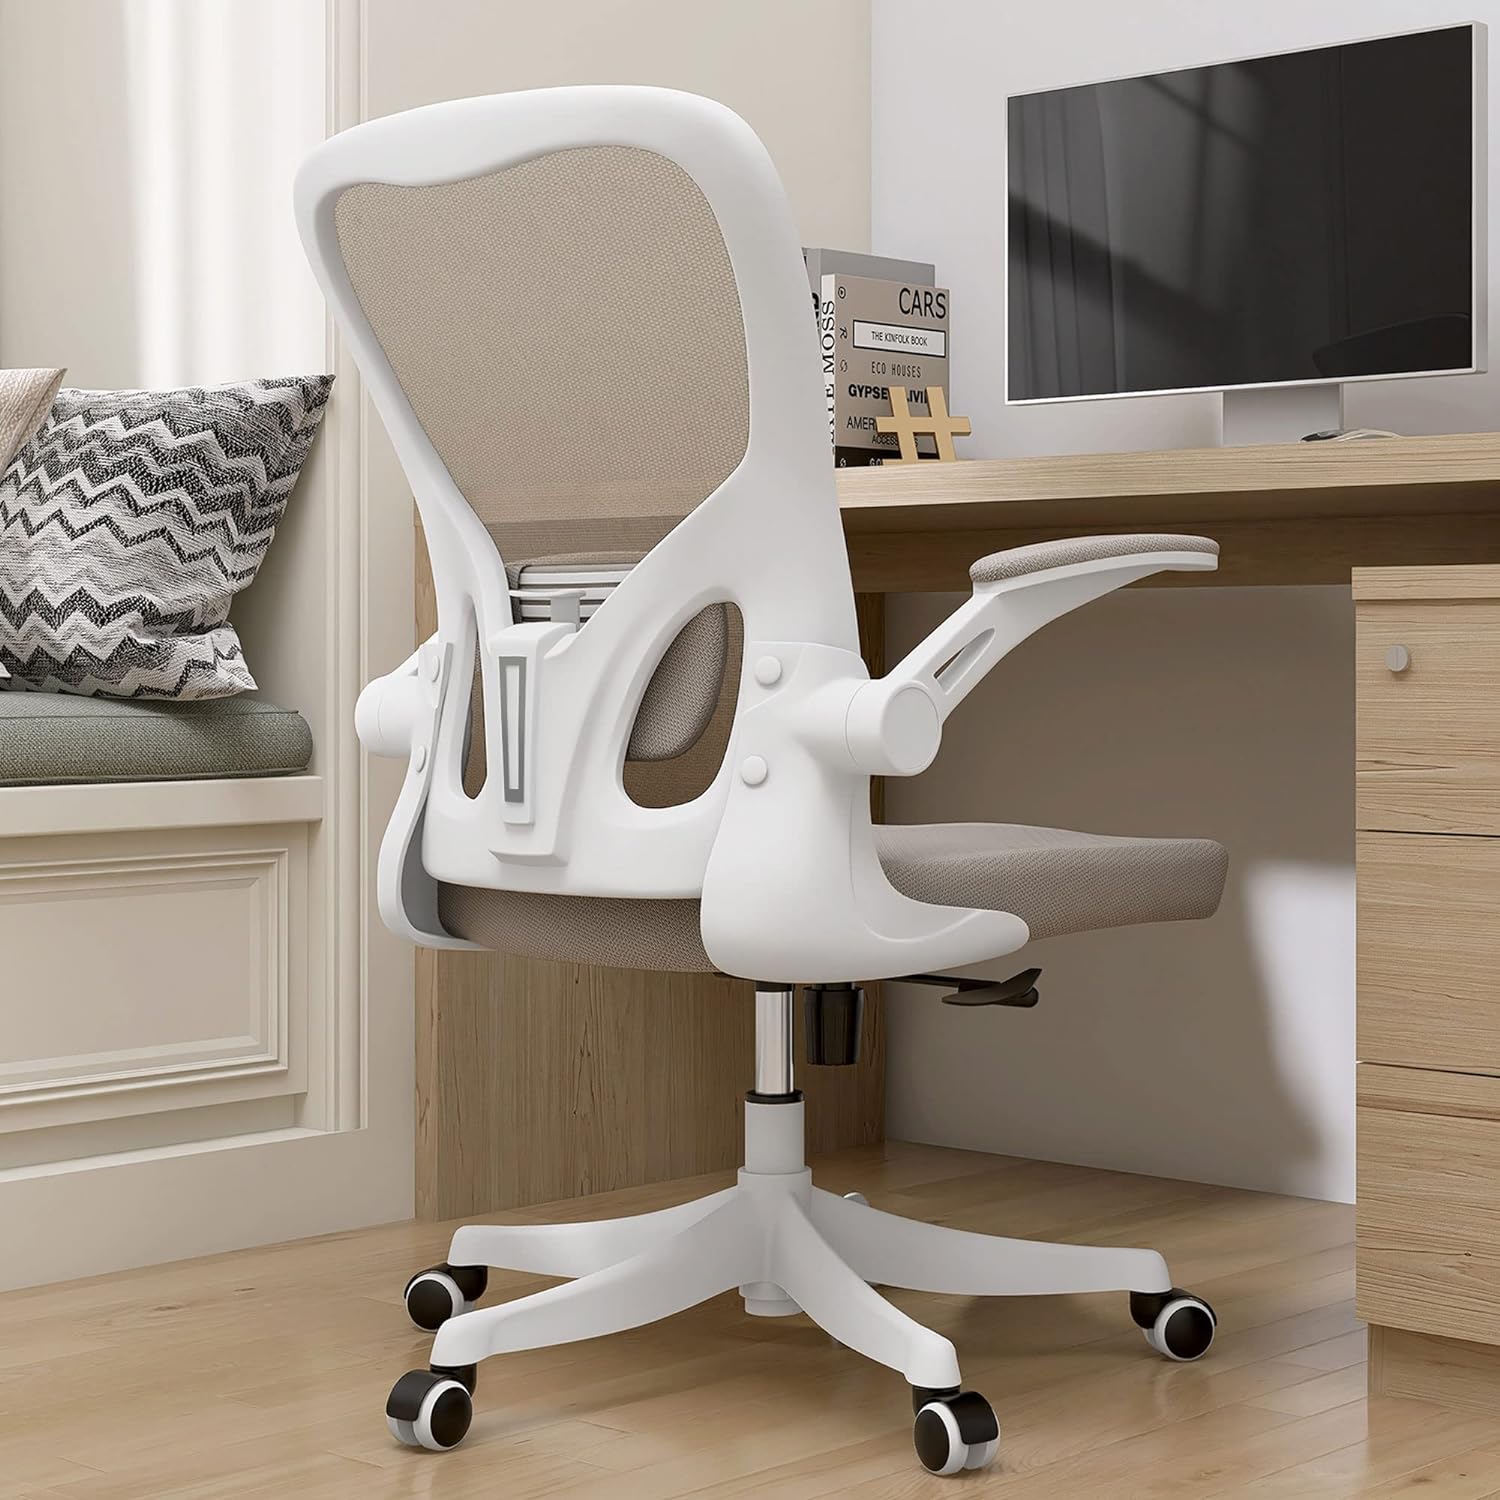 Monhey Desk Computer Chairs - Ergonomic with Lumbar Support & Flip-up Arms Home Office Height Adjustable High Back Rockable Swivel 360 Warm Taupe Mesh Study Chair